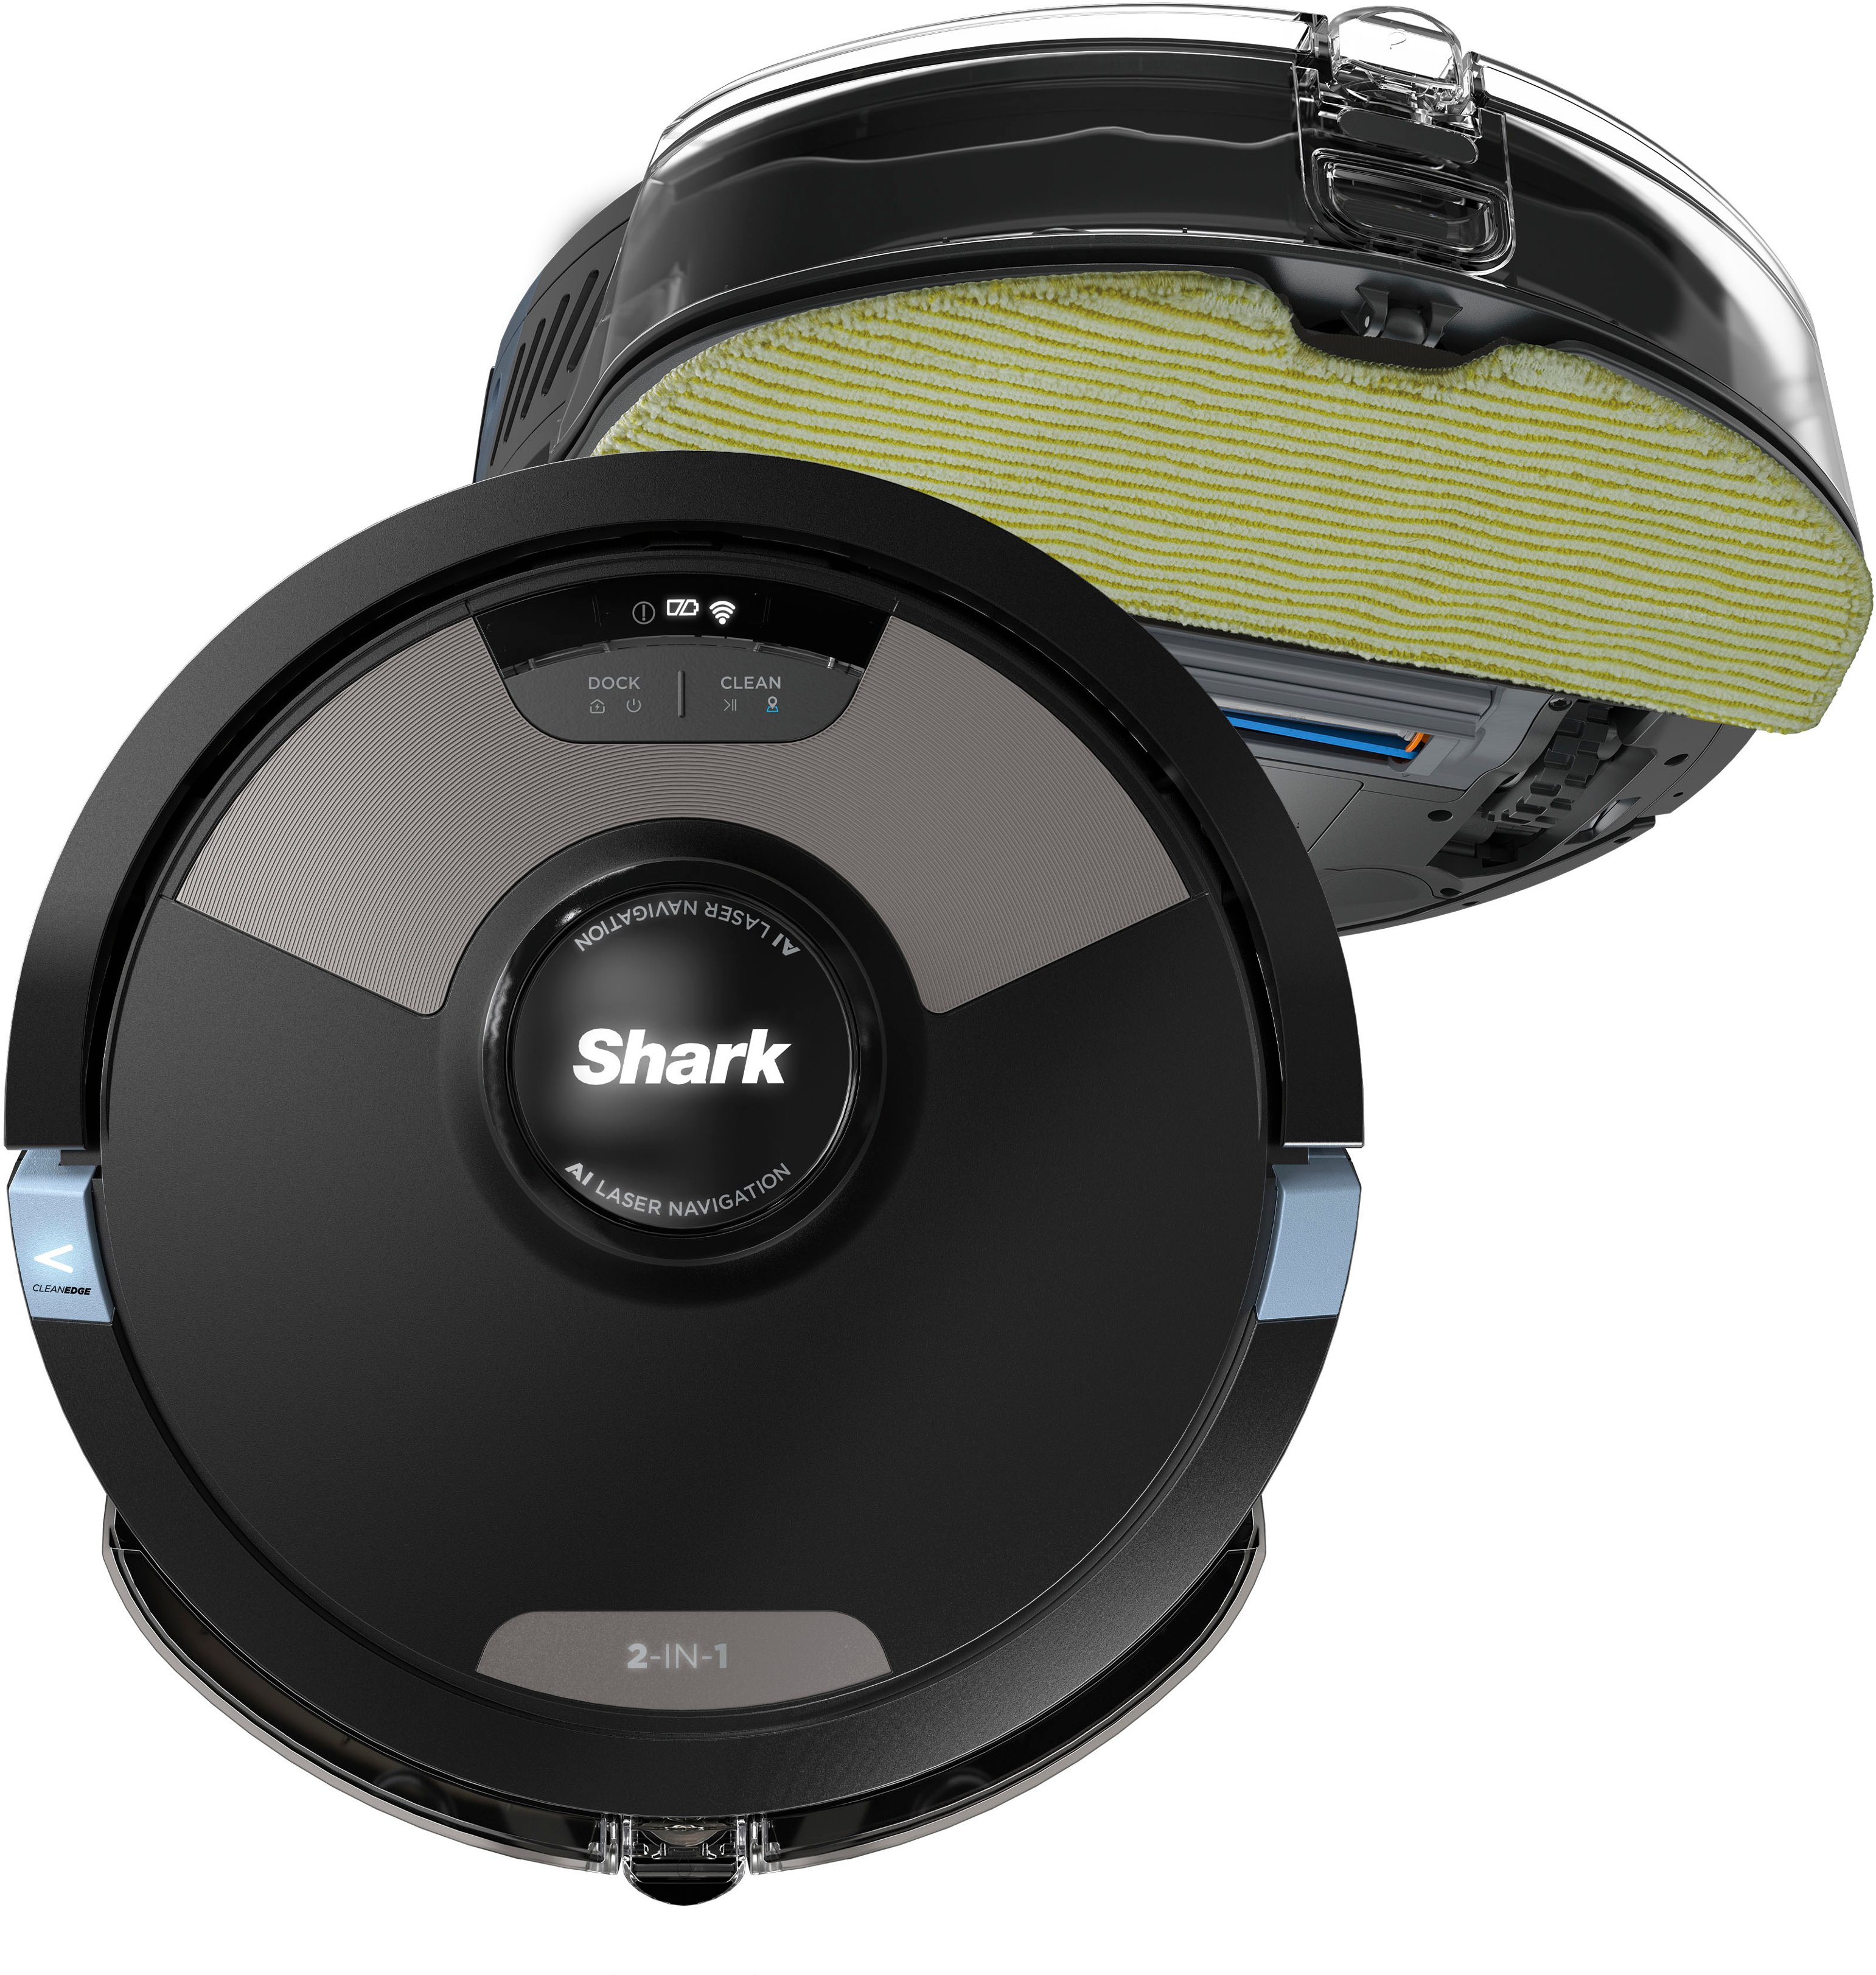 Best robot vacuum deal: The Roomba i2 is almost half off